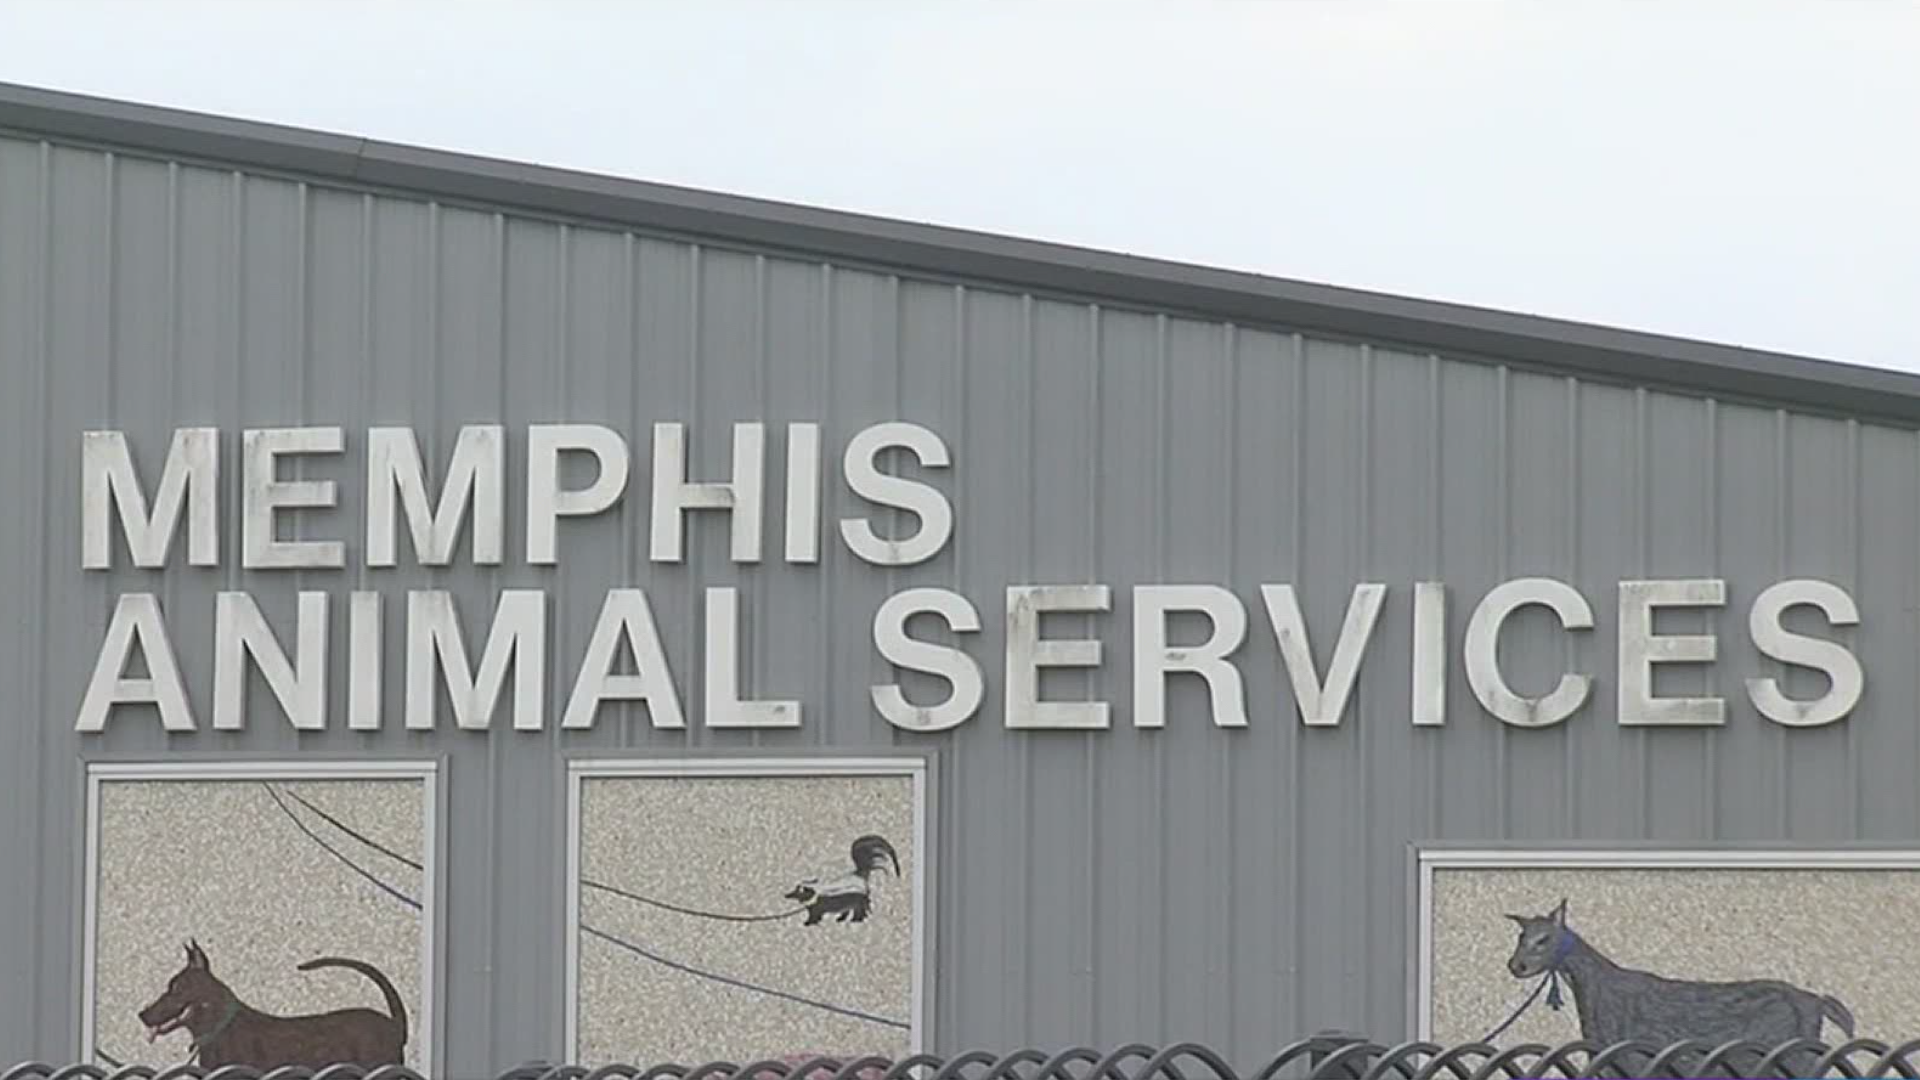 Last week, Memphis Animal Services issued a code red alert for adopters and fosters as in-take capacity climbs, adoptions dip.